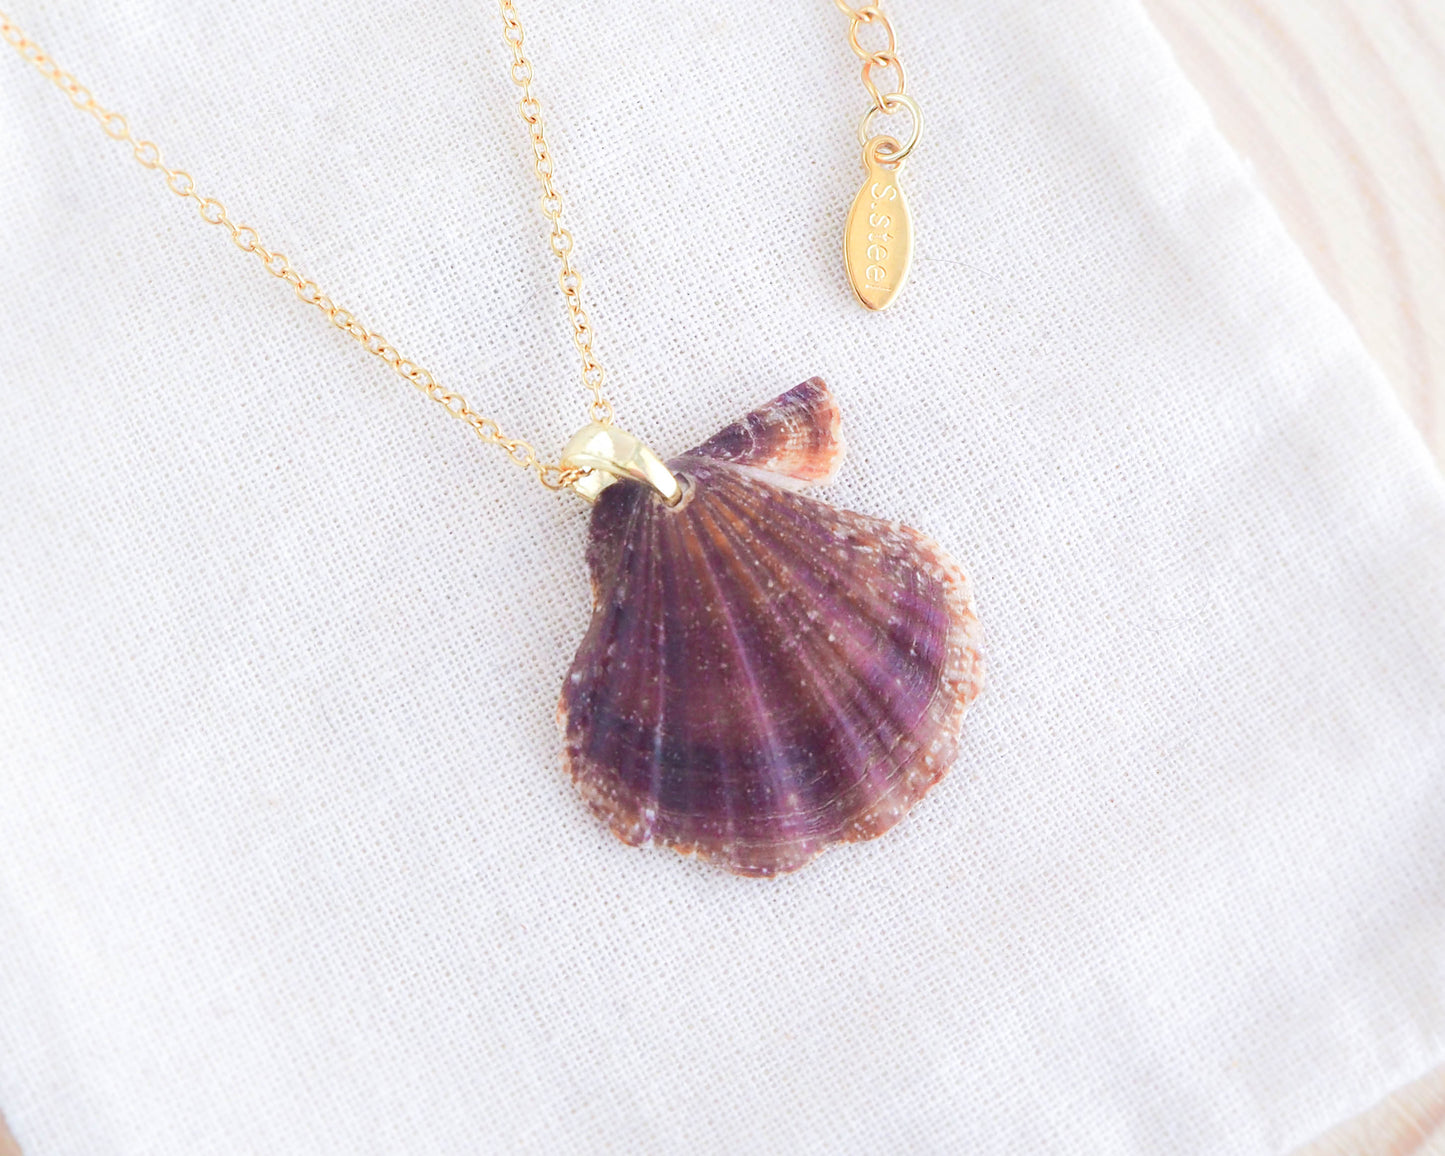 Animal Print Shell Gold Necklace, Real Shell from Algarve, Portugal. Brown Scallop Shell Necklace, Stainless Steel chain,